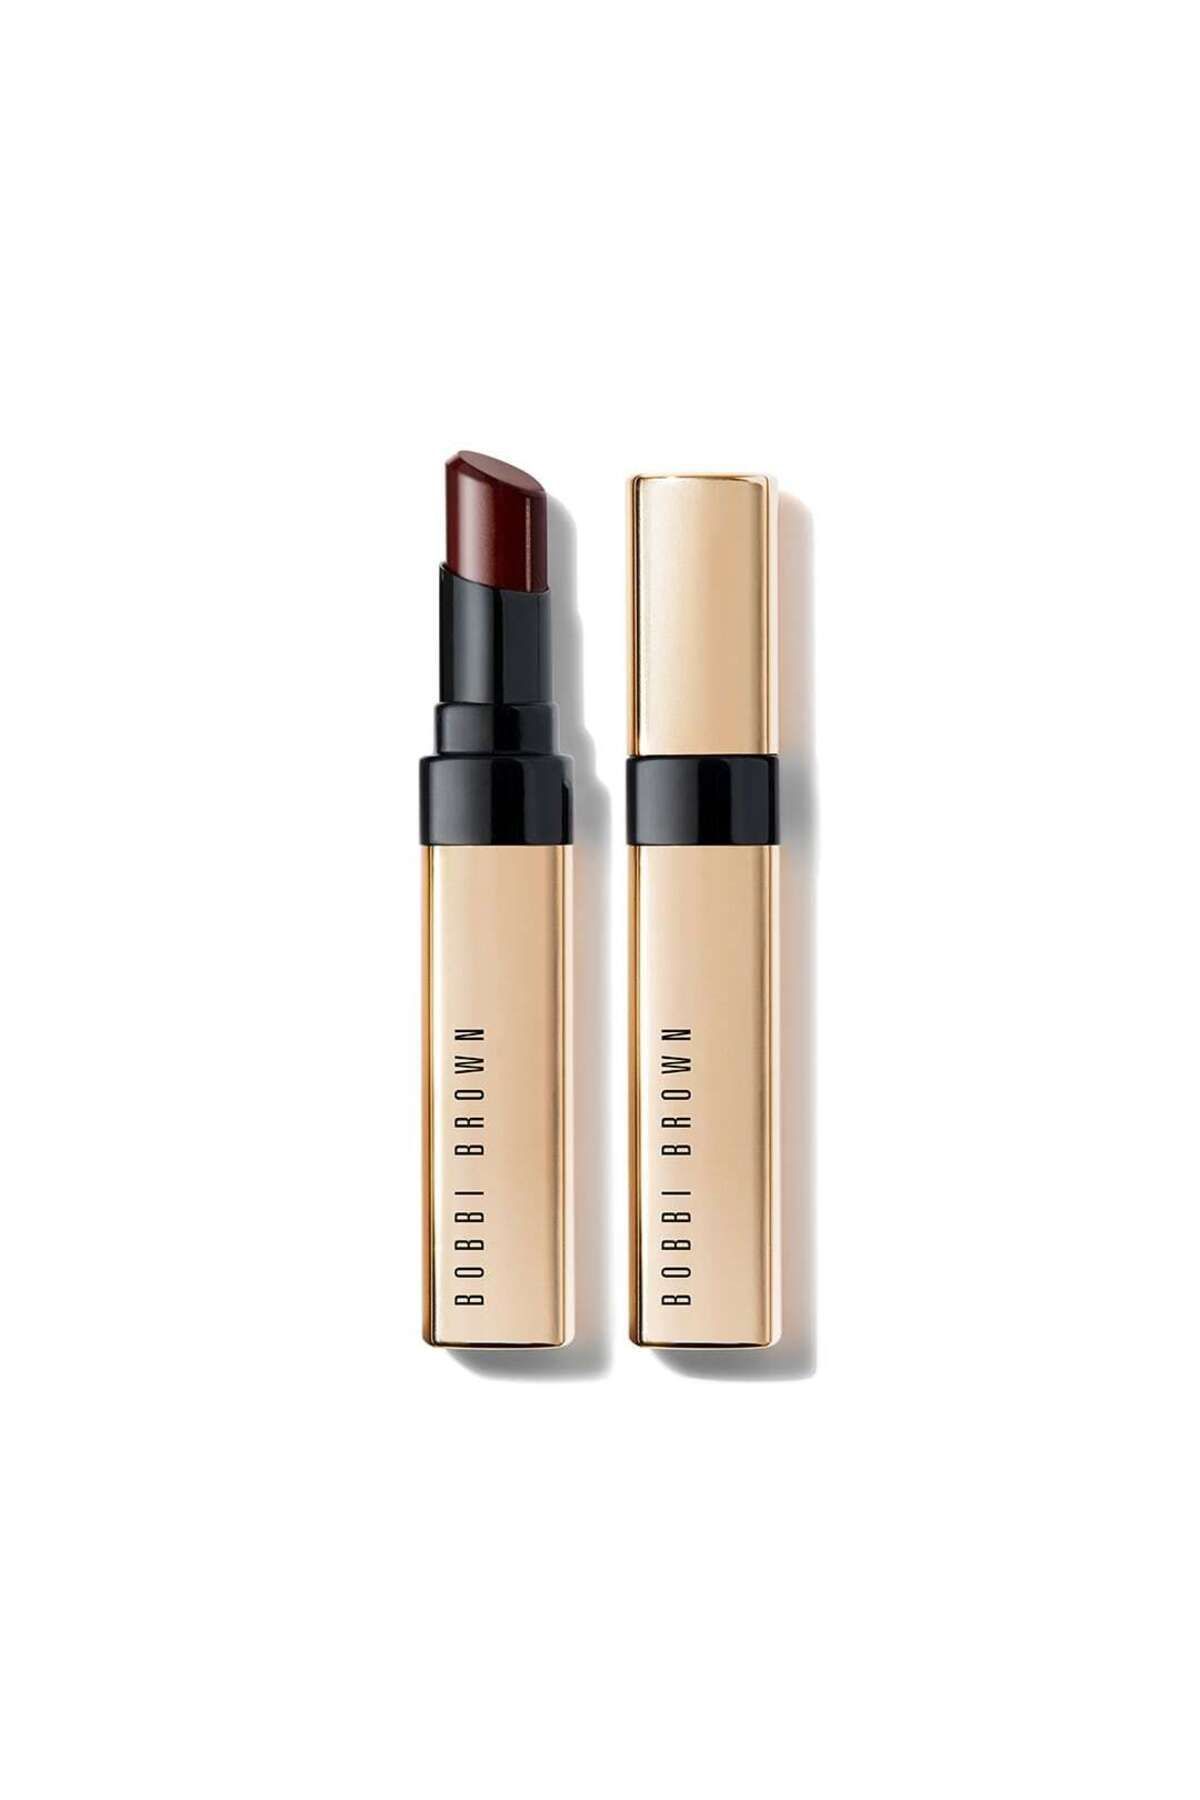 Bobbi Brown LUXE SHİNE INTENSELY PİGMENTED INTENSE LİPSTİCK FH19 NİGHT SPELL 2.3 G